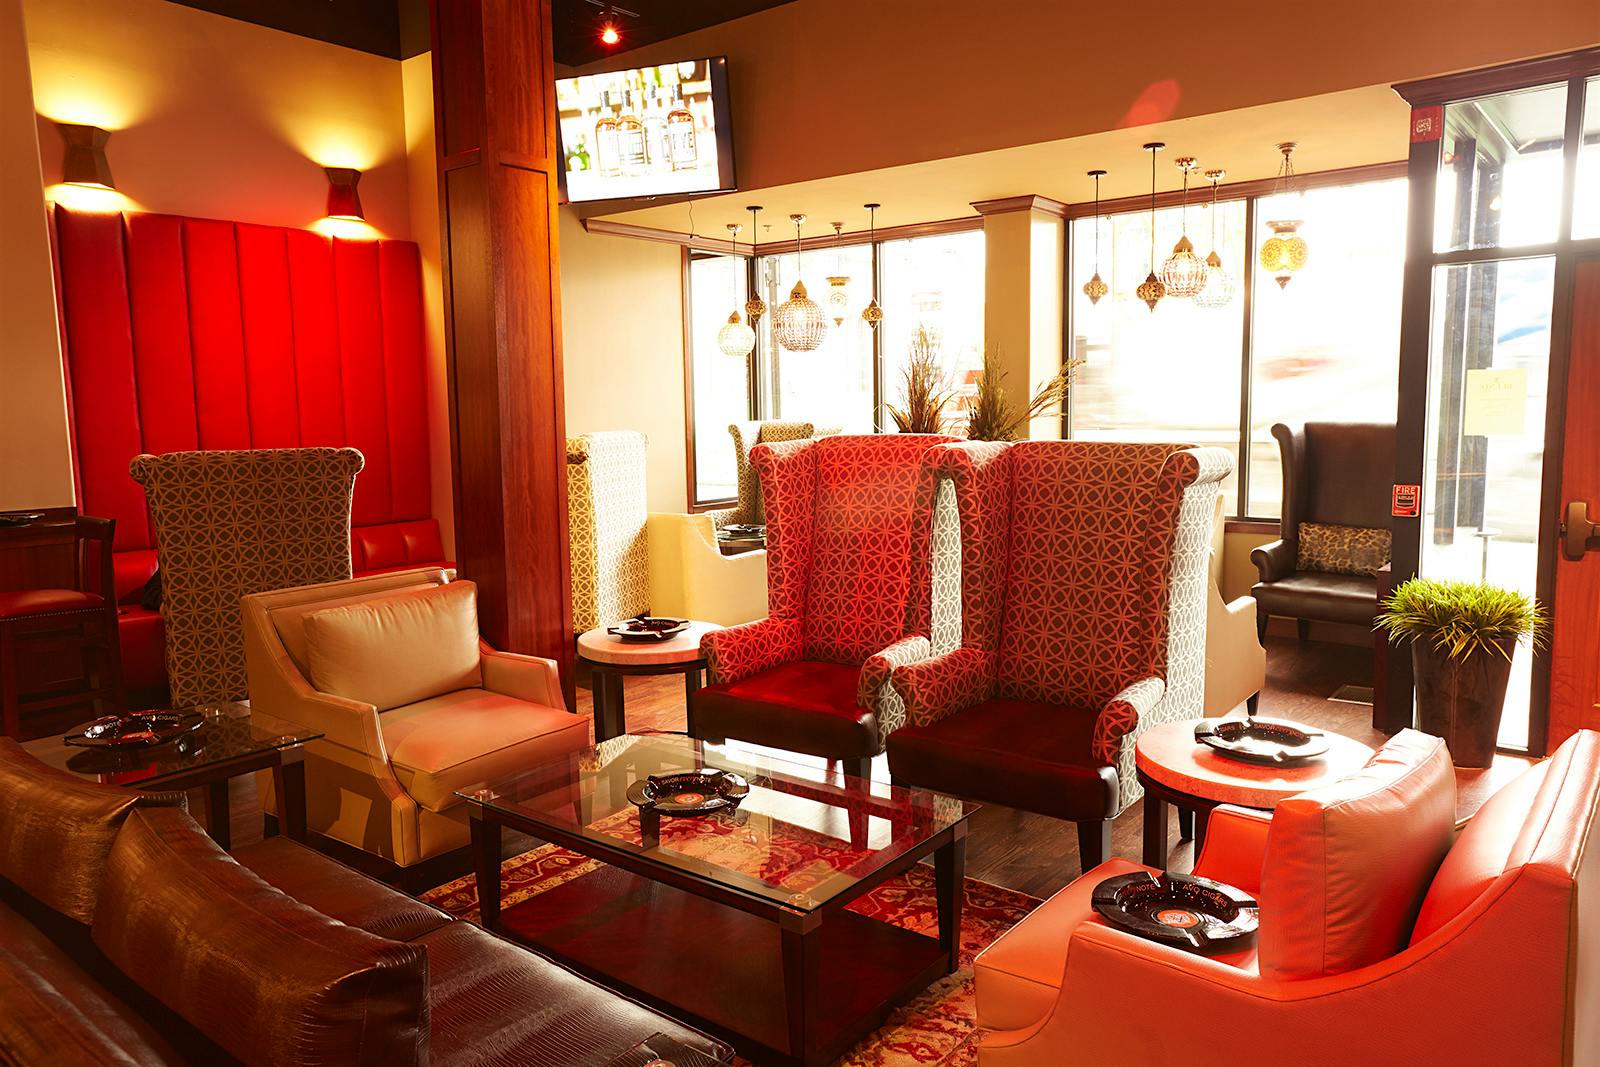 The front sitting area offers cozy leather couches and easy chairs.